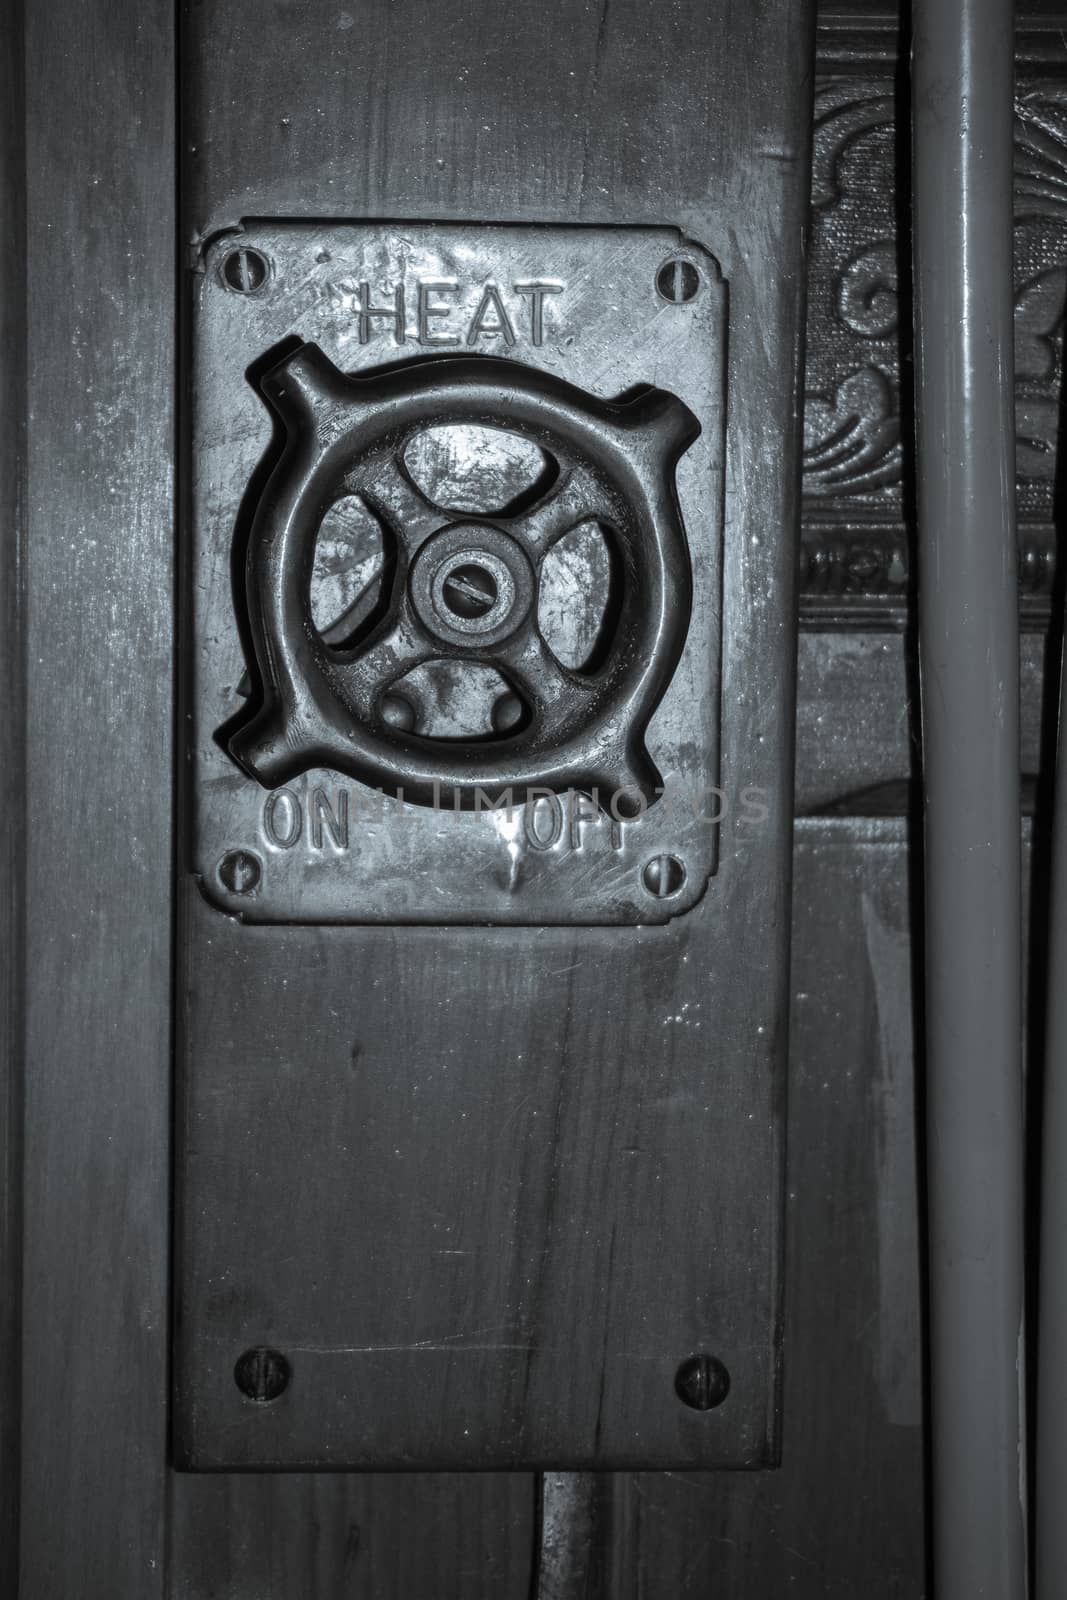 Old fashioned heating switch off, on switch or knob retro image close up on panelled wall.